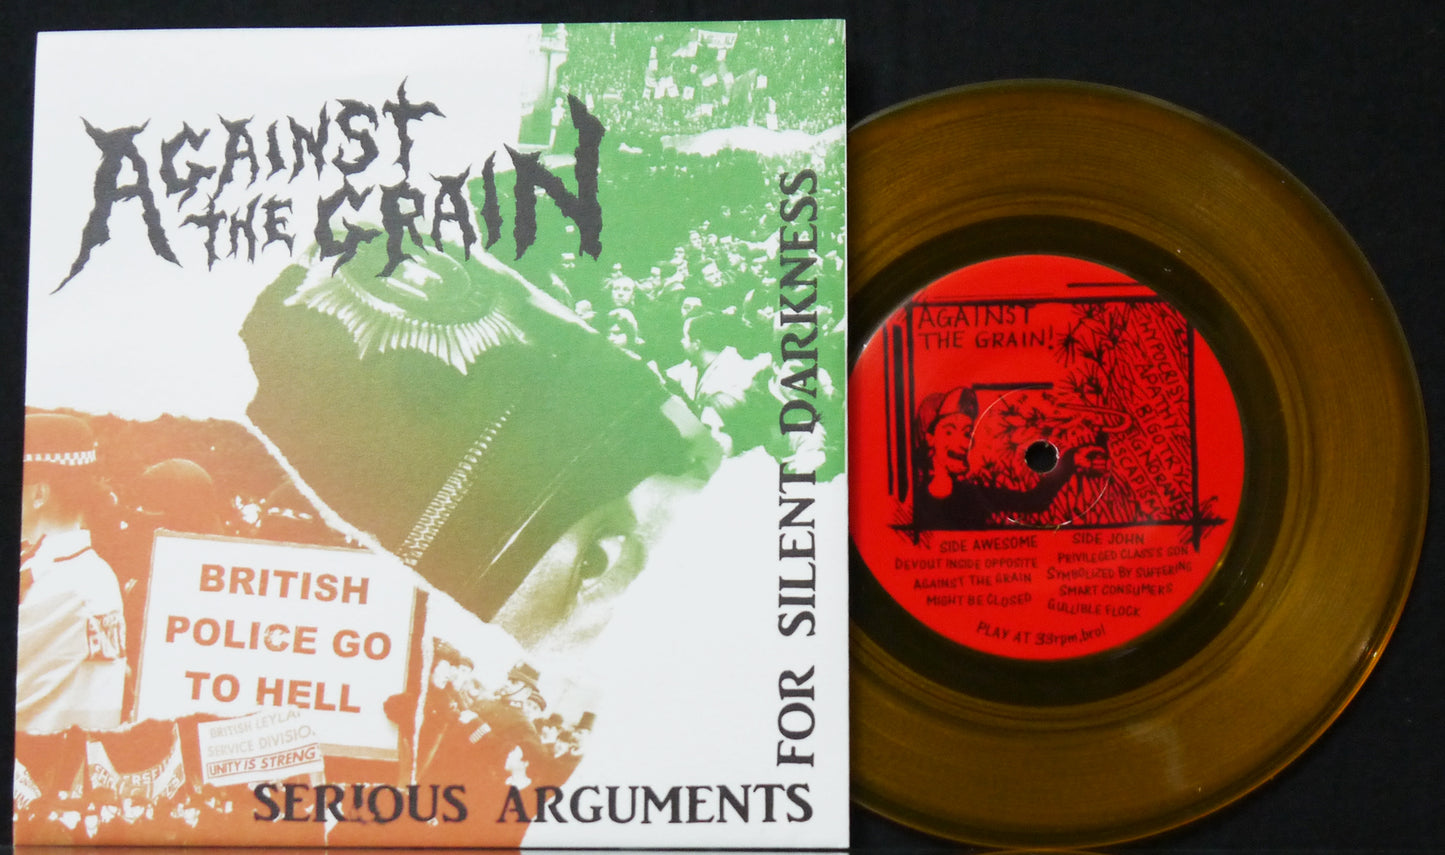 AGAINST THE GRAIN - Serious Arguments For Silent Darkness 7"